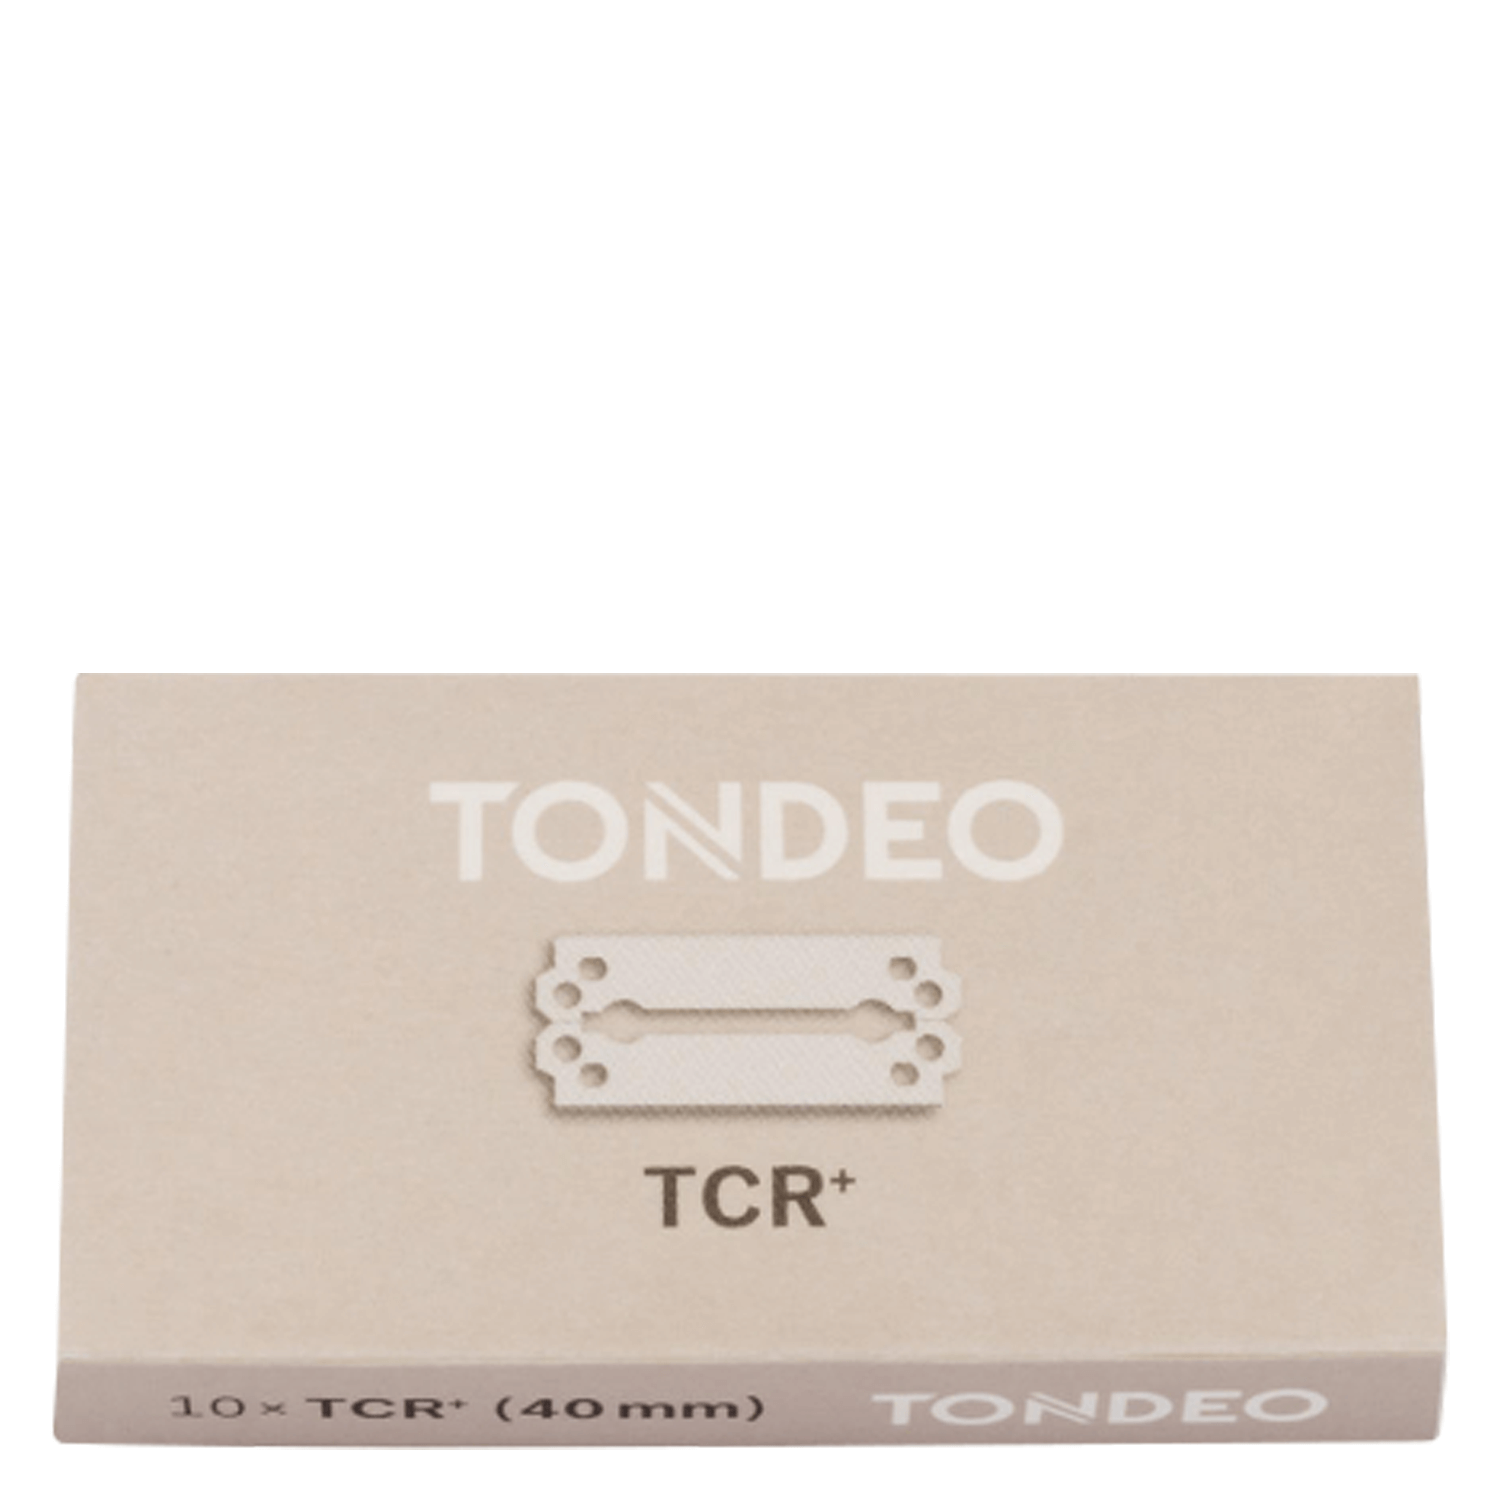 Product image from Tondeo Blades - TCR+ Blades